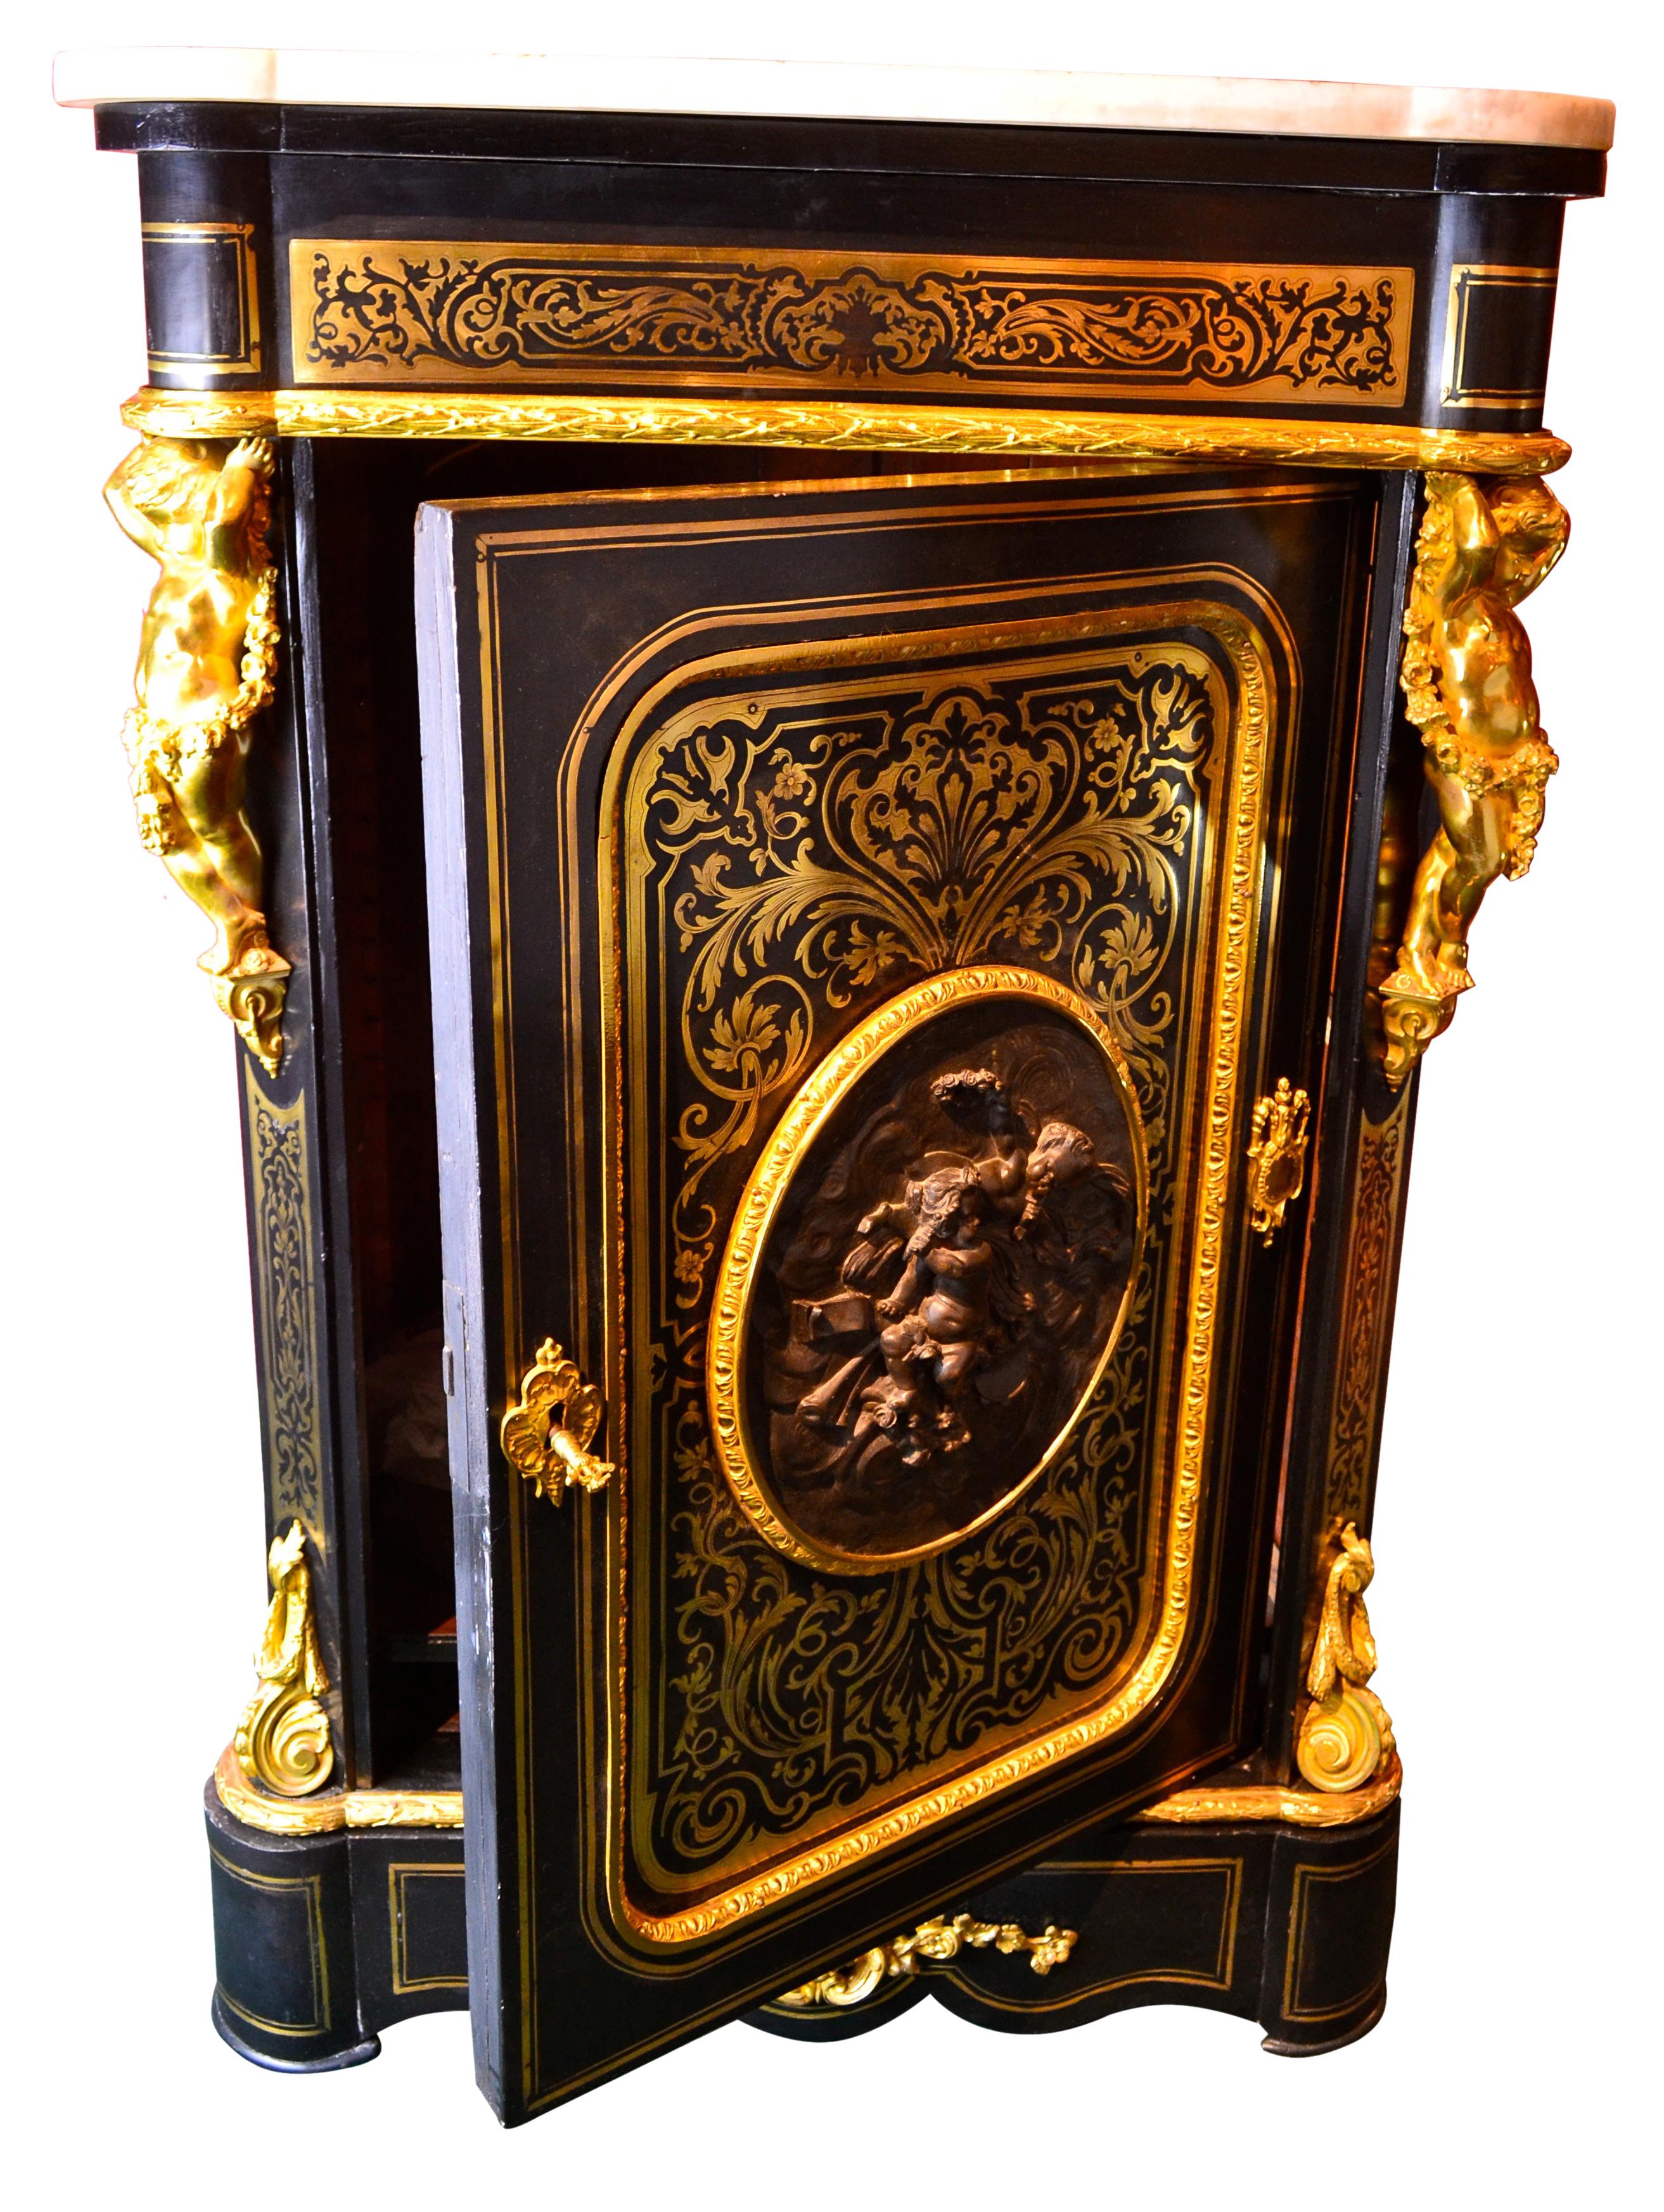 A gilt bronze mounted ebonized and brass inlaid cupboard or as the French refer to them a 